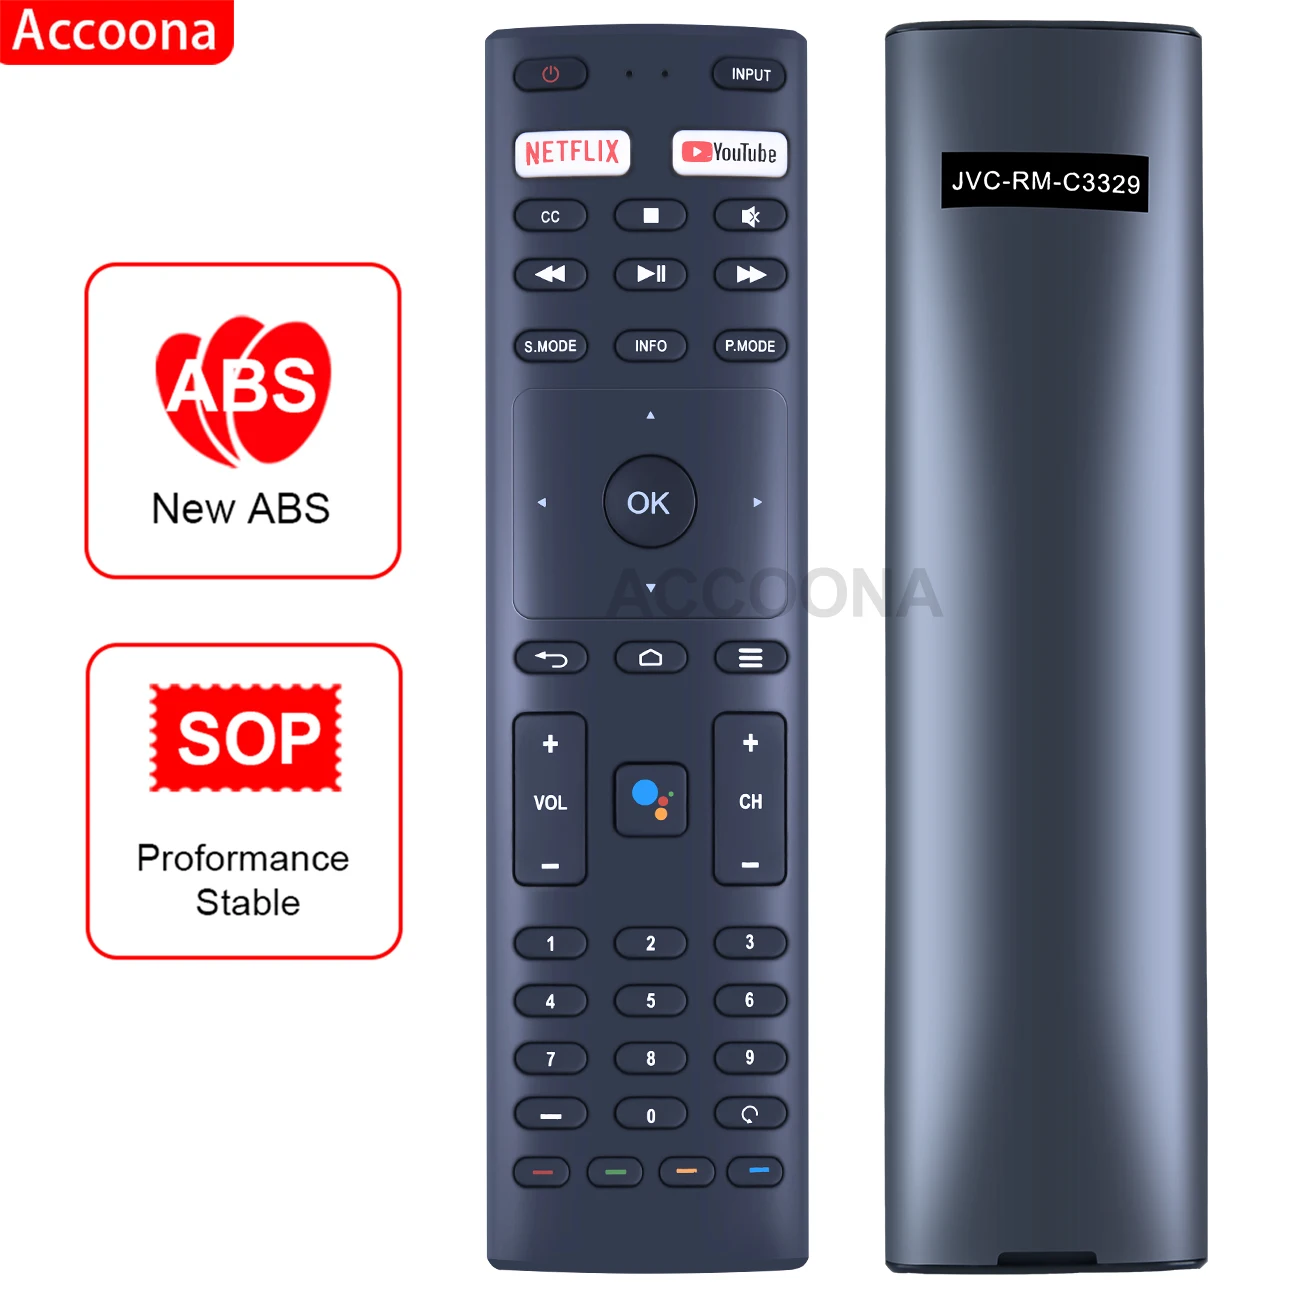 

Accoona Voice Remote RM-C3329 RM-C3359 RM-C3369 for Konka JVC TV 32H31A 40H33A 43U55A 50Q75A 50U55A 55Q75A 55U55A 65Q75A 65U55A